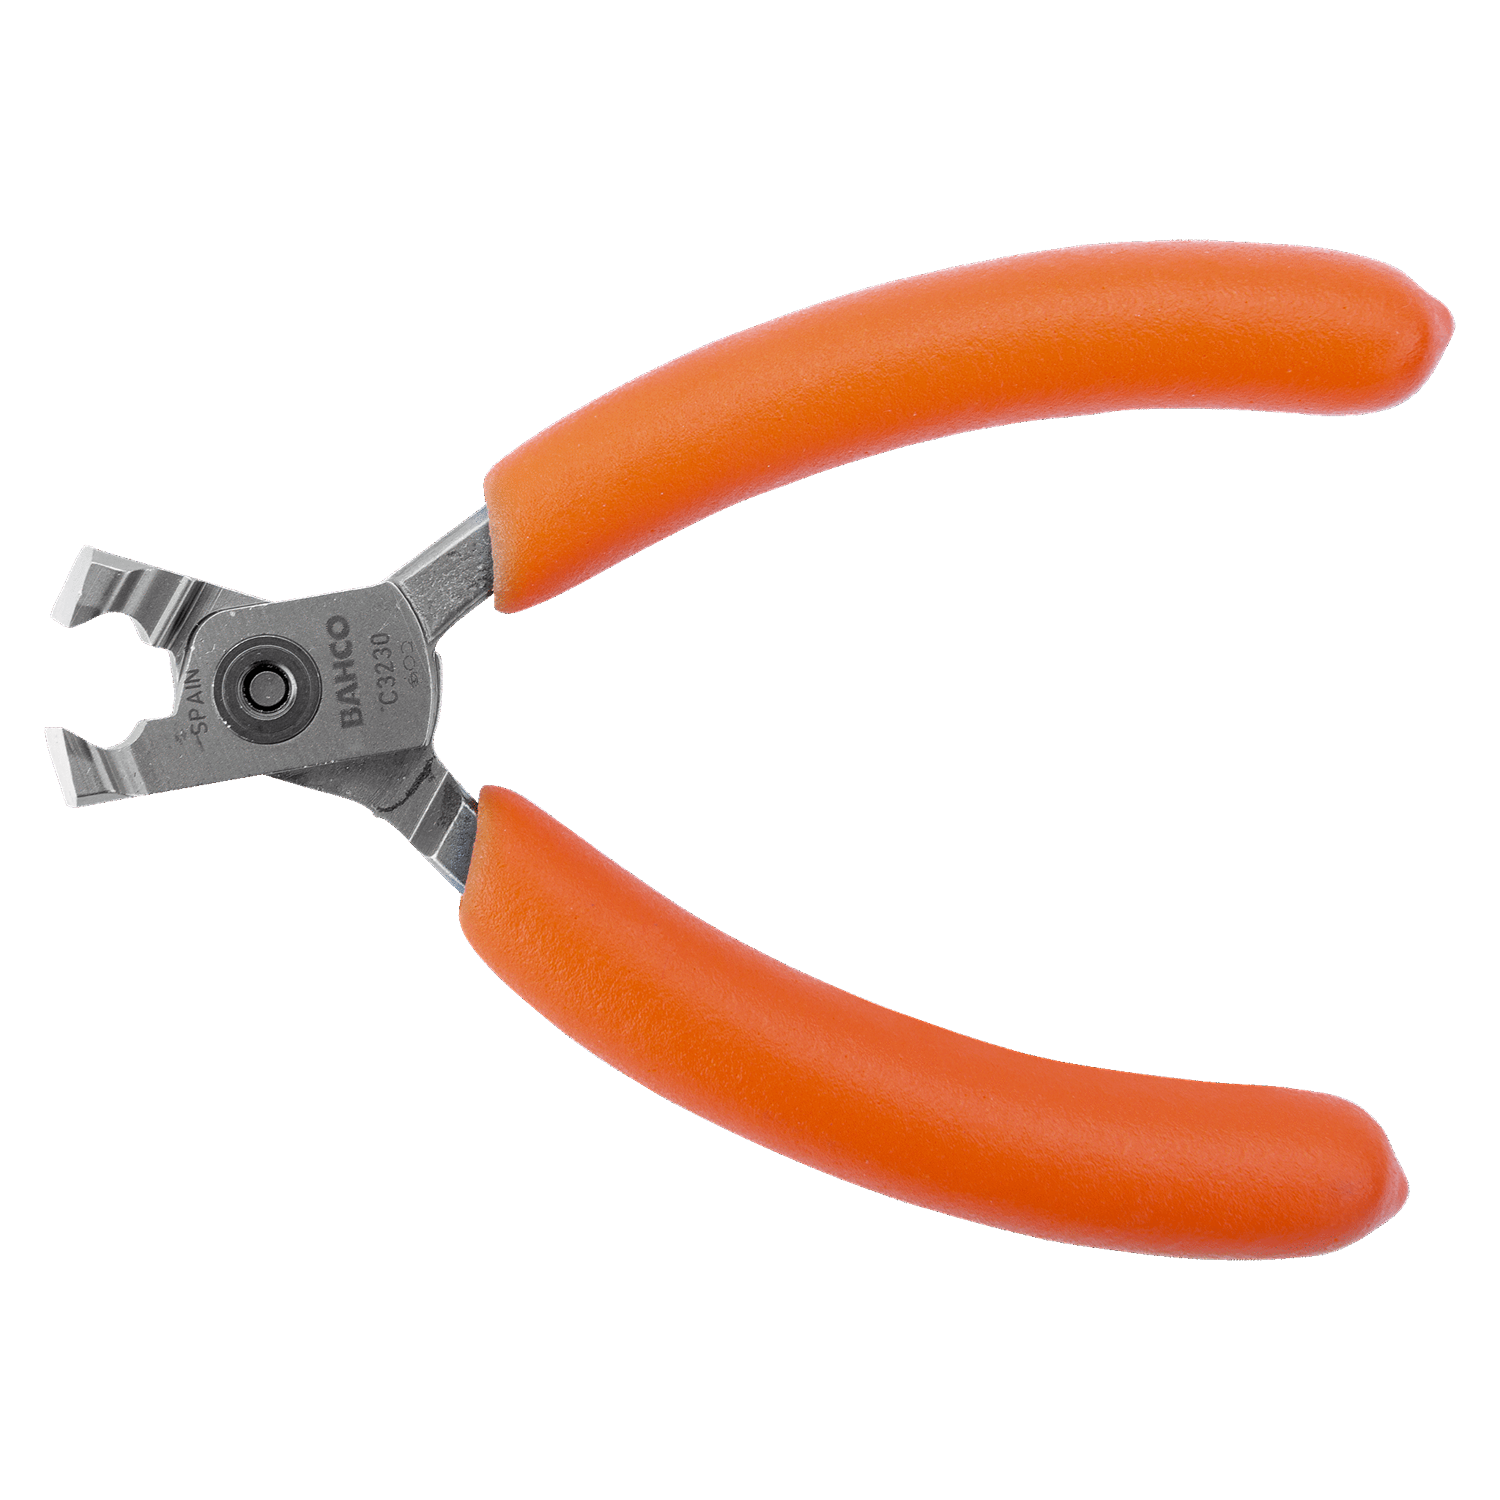 BAHCO C3230 Compact End Cutting Plier with Orange PVC Handle - Premium Cutting Plier from BAHCO - Shop now at Yew Aik.